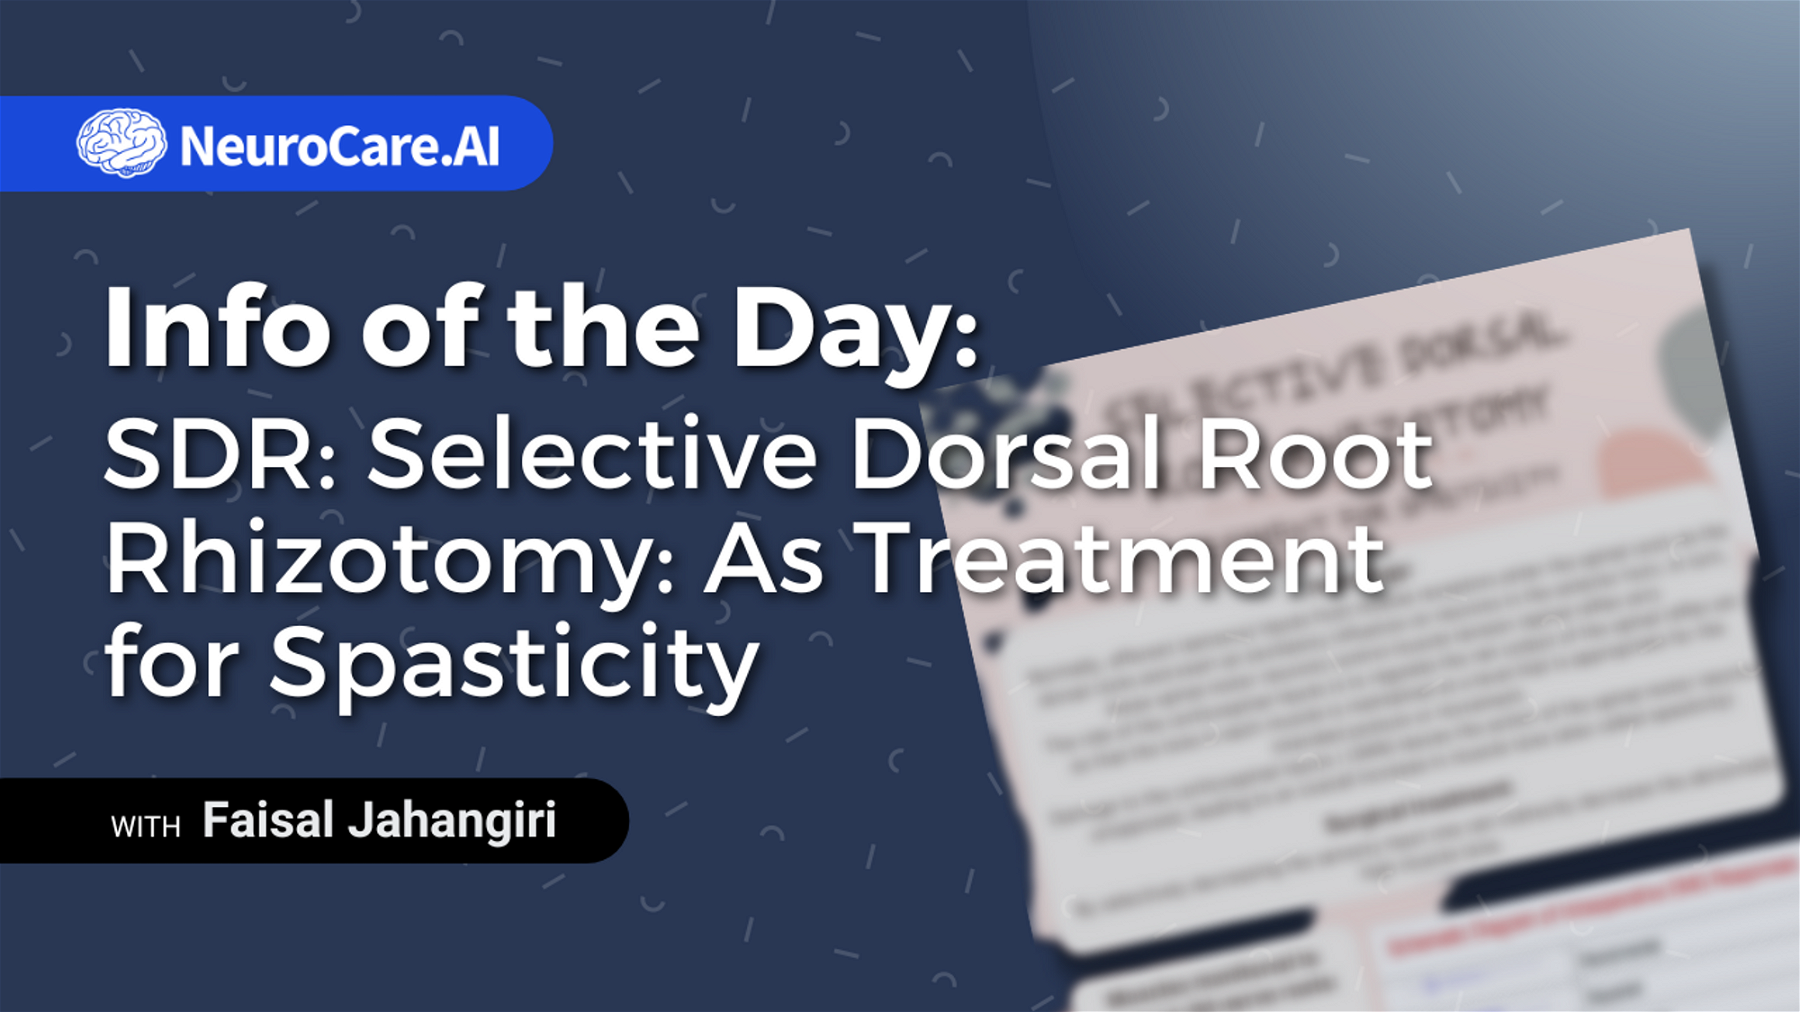 Info of the Day: "SDR: Selective Dorsal Root Rhizotomy: As Treatment for Spasticity"